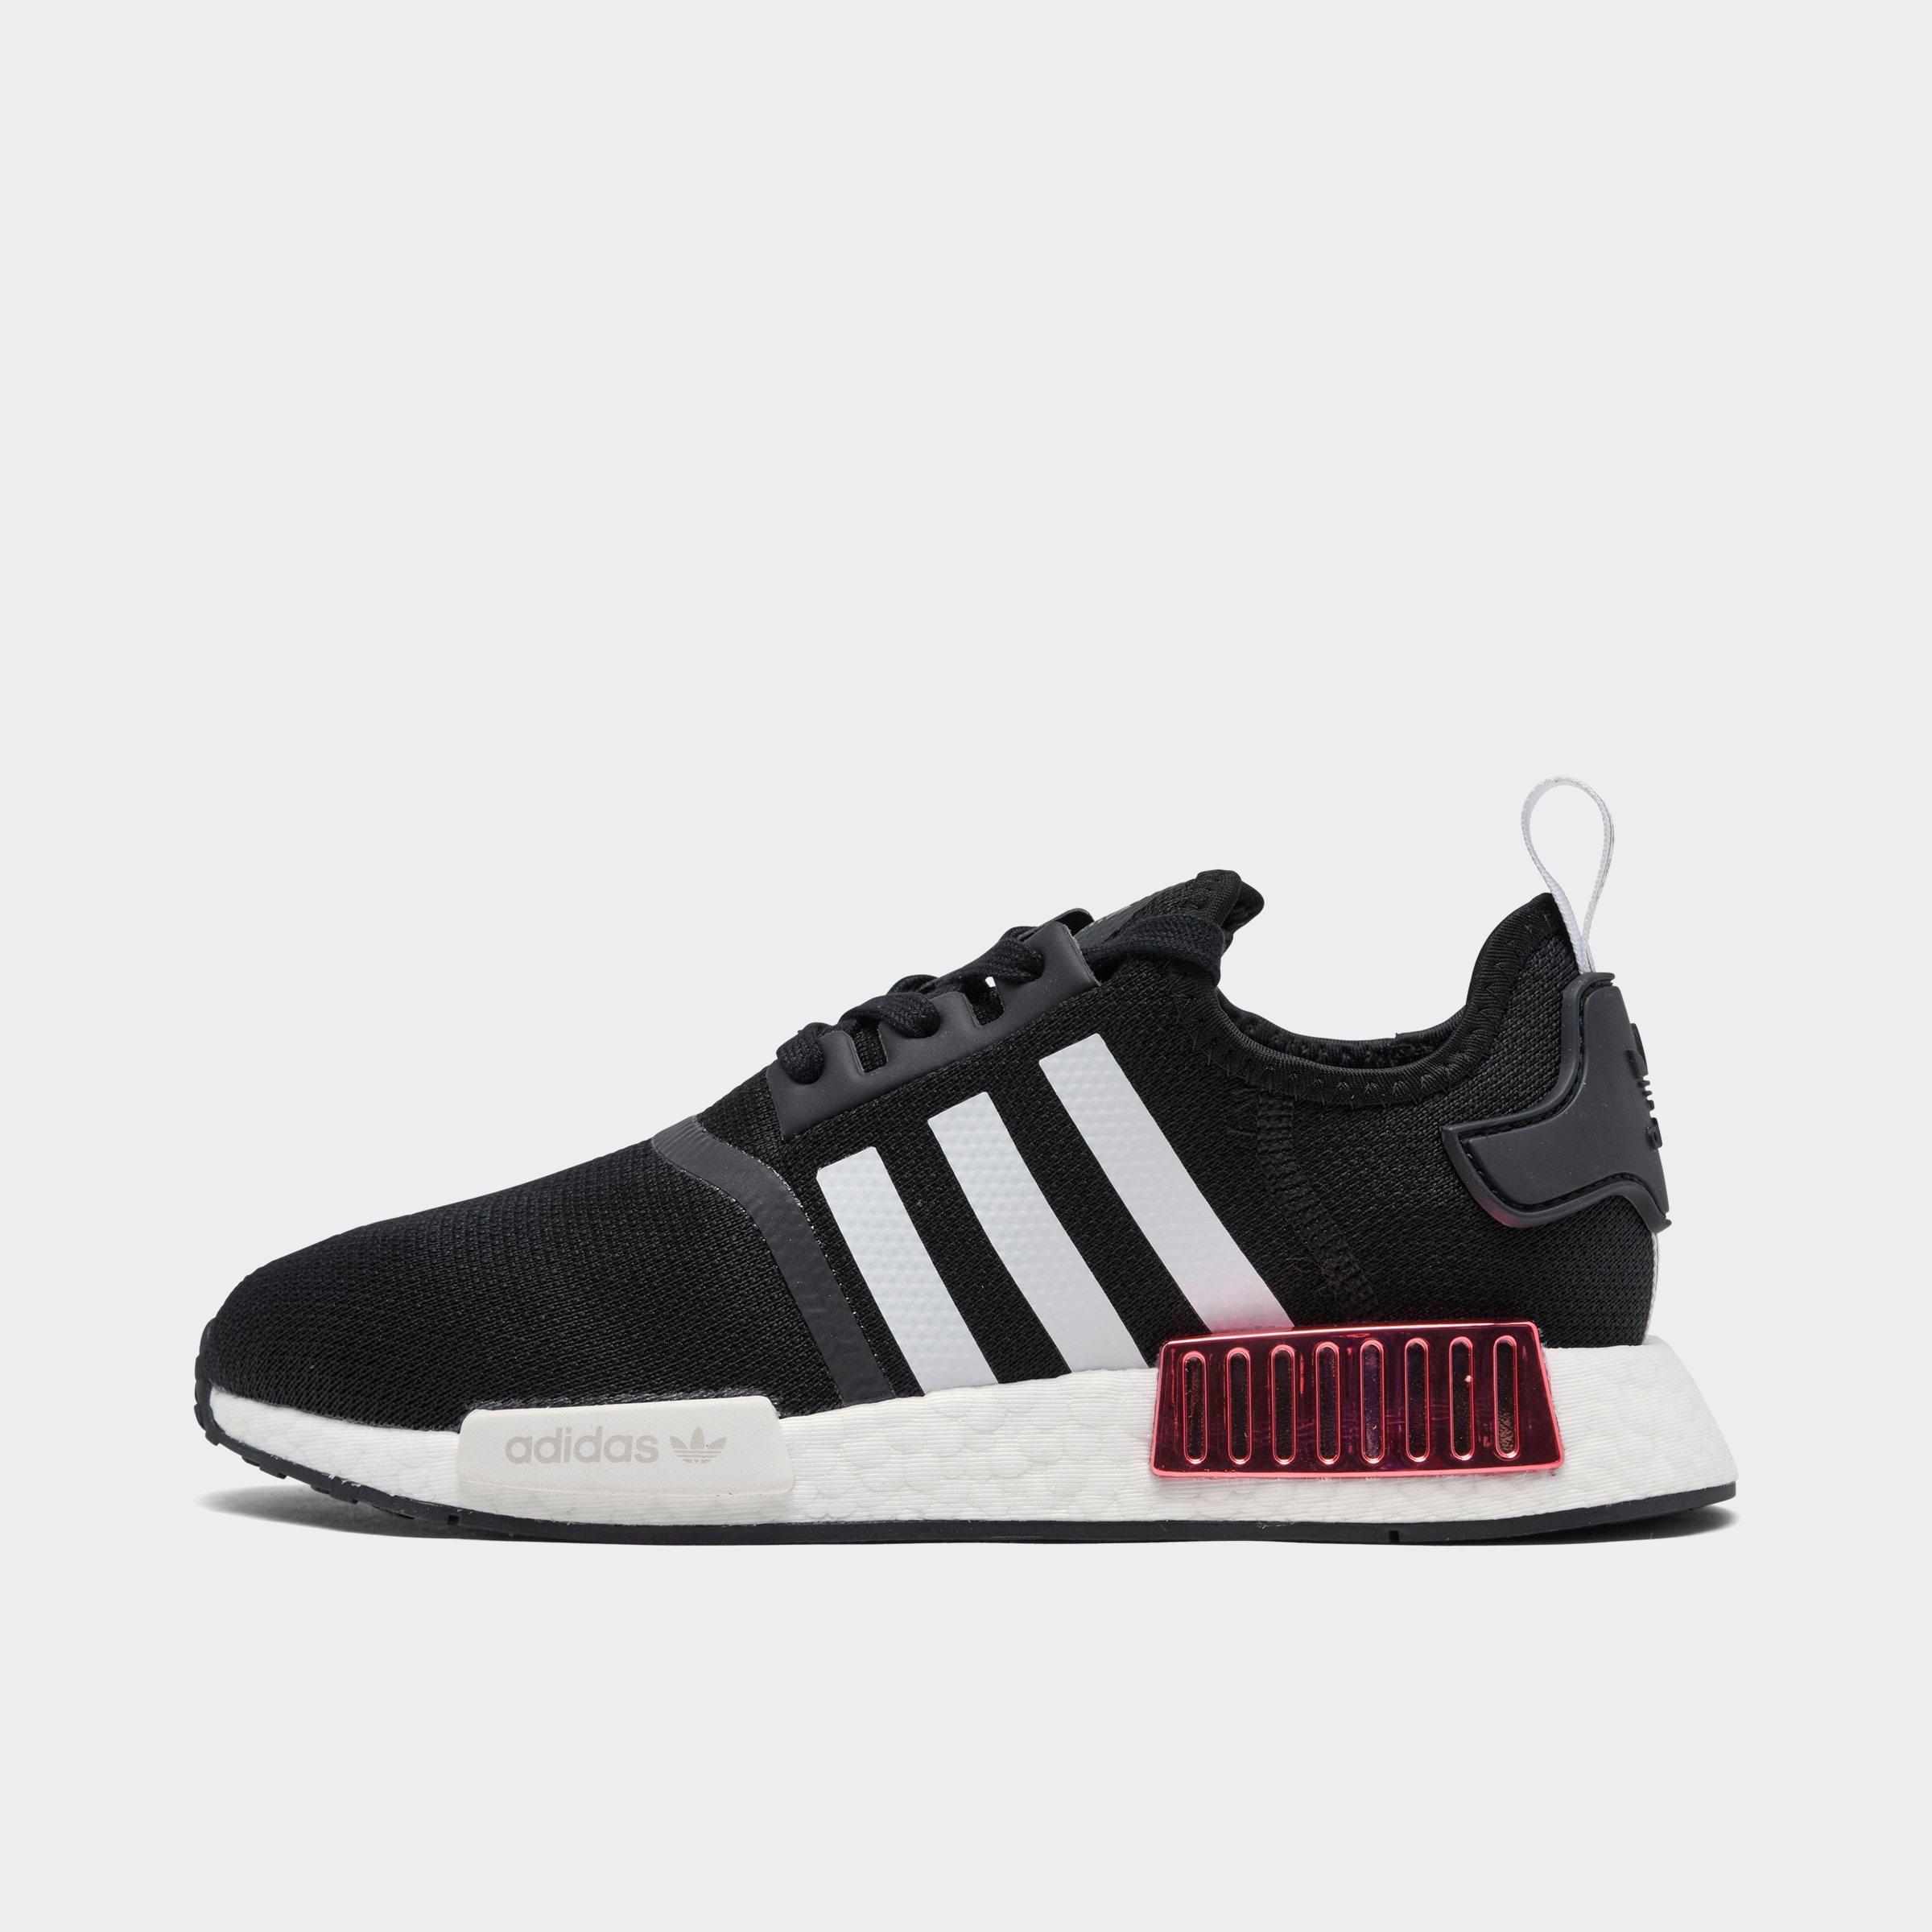 Women's Originals NMD R1 Casual Shoes| JD Sports